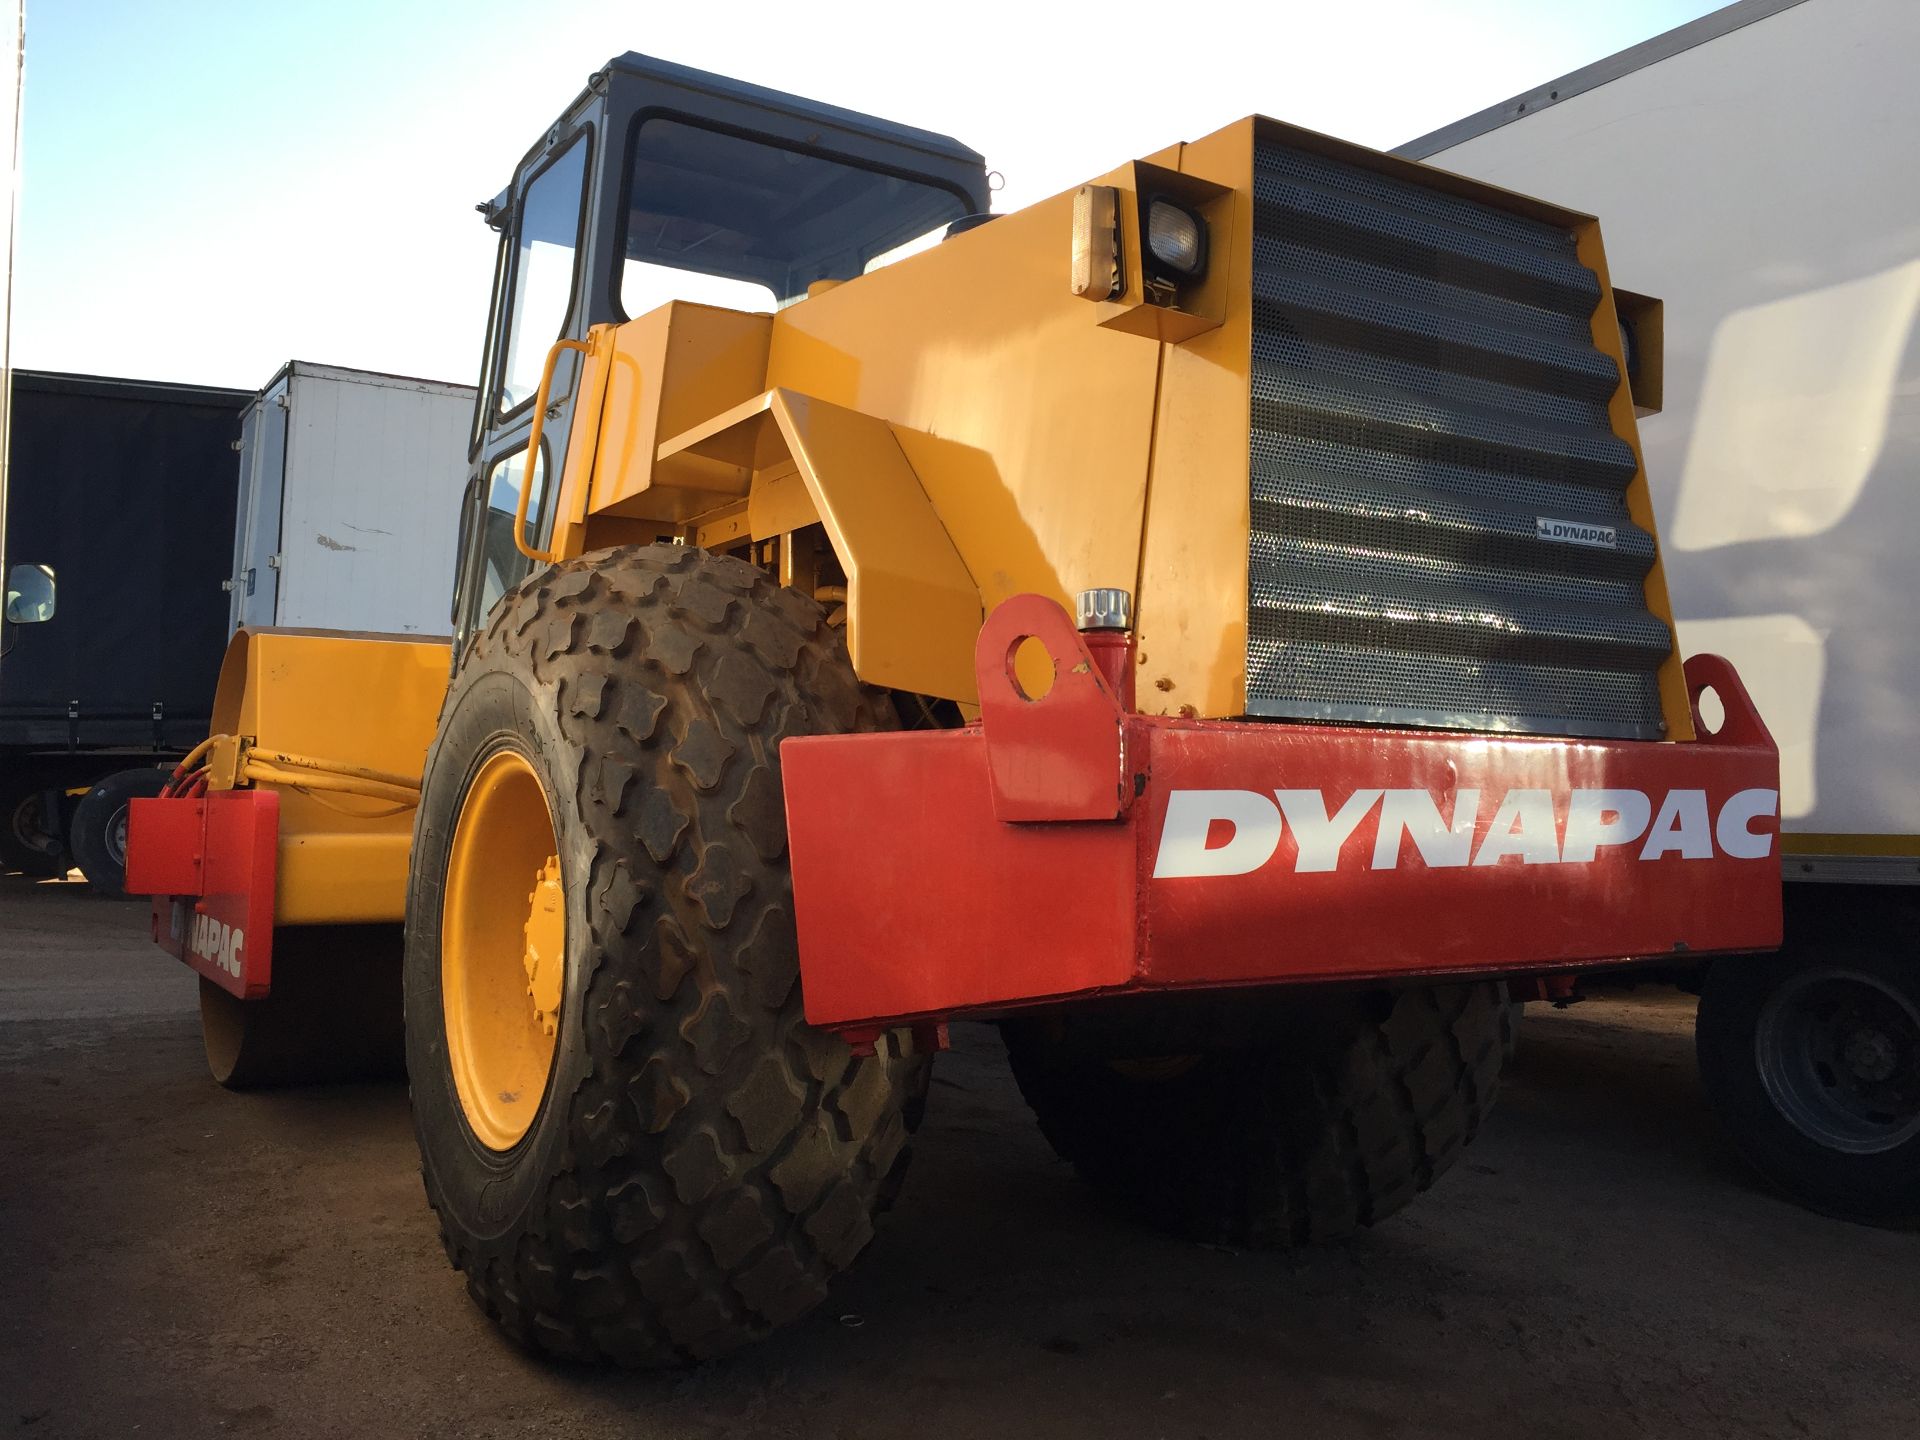 1998 DYNAPAC CA251D S/DRUM ROLLER - SERIAL NO: 58313913 - Image 3 of 3